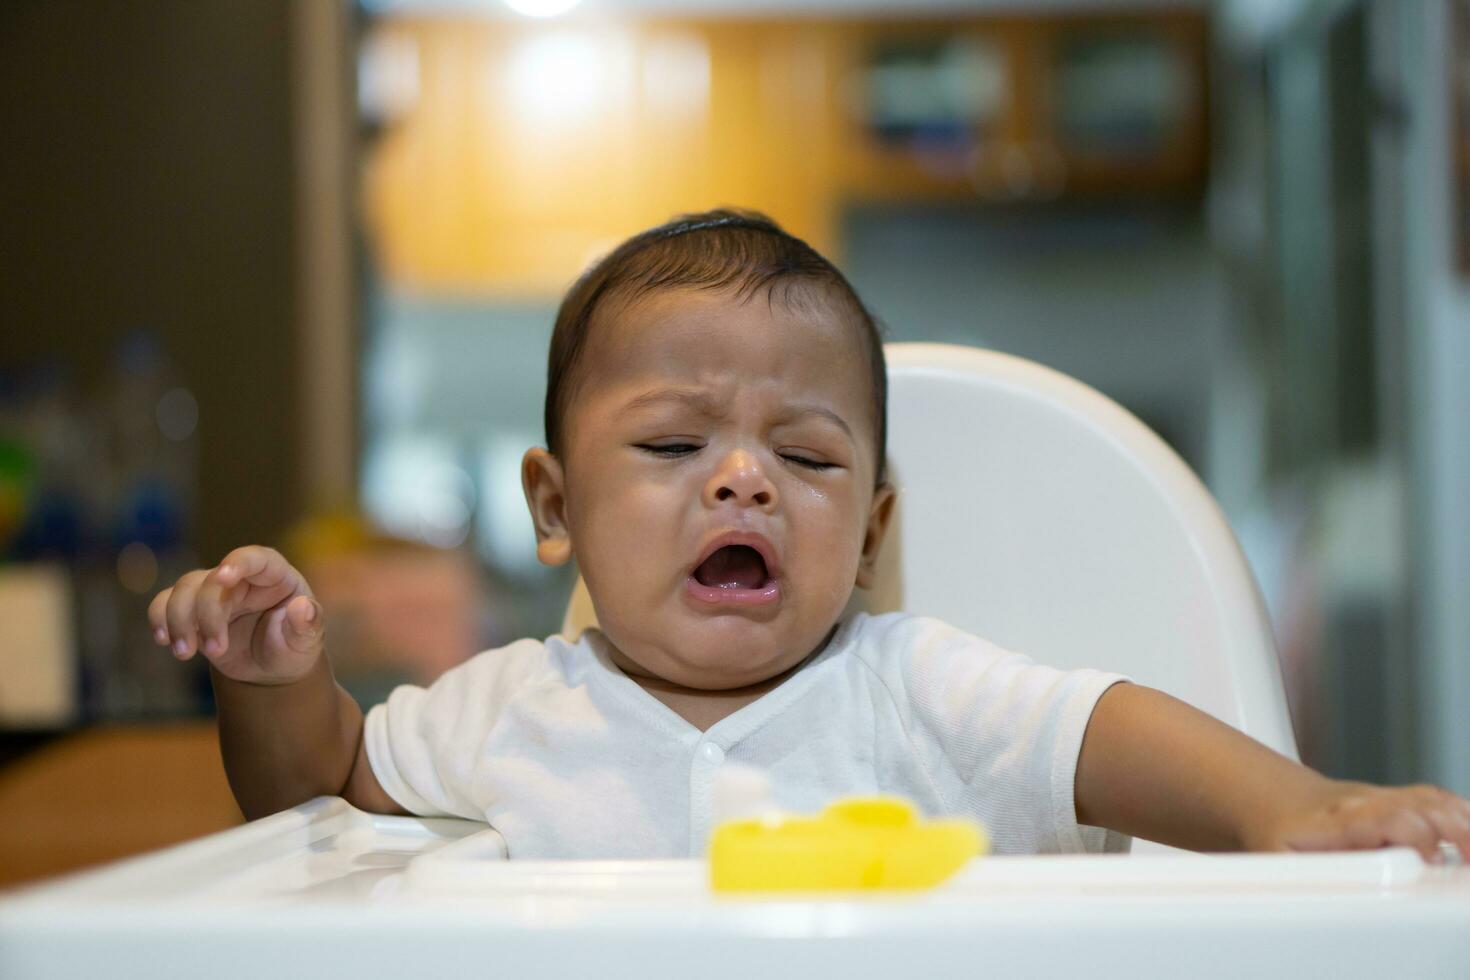 One asian baby crying on Dining chair photo